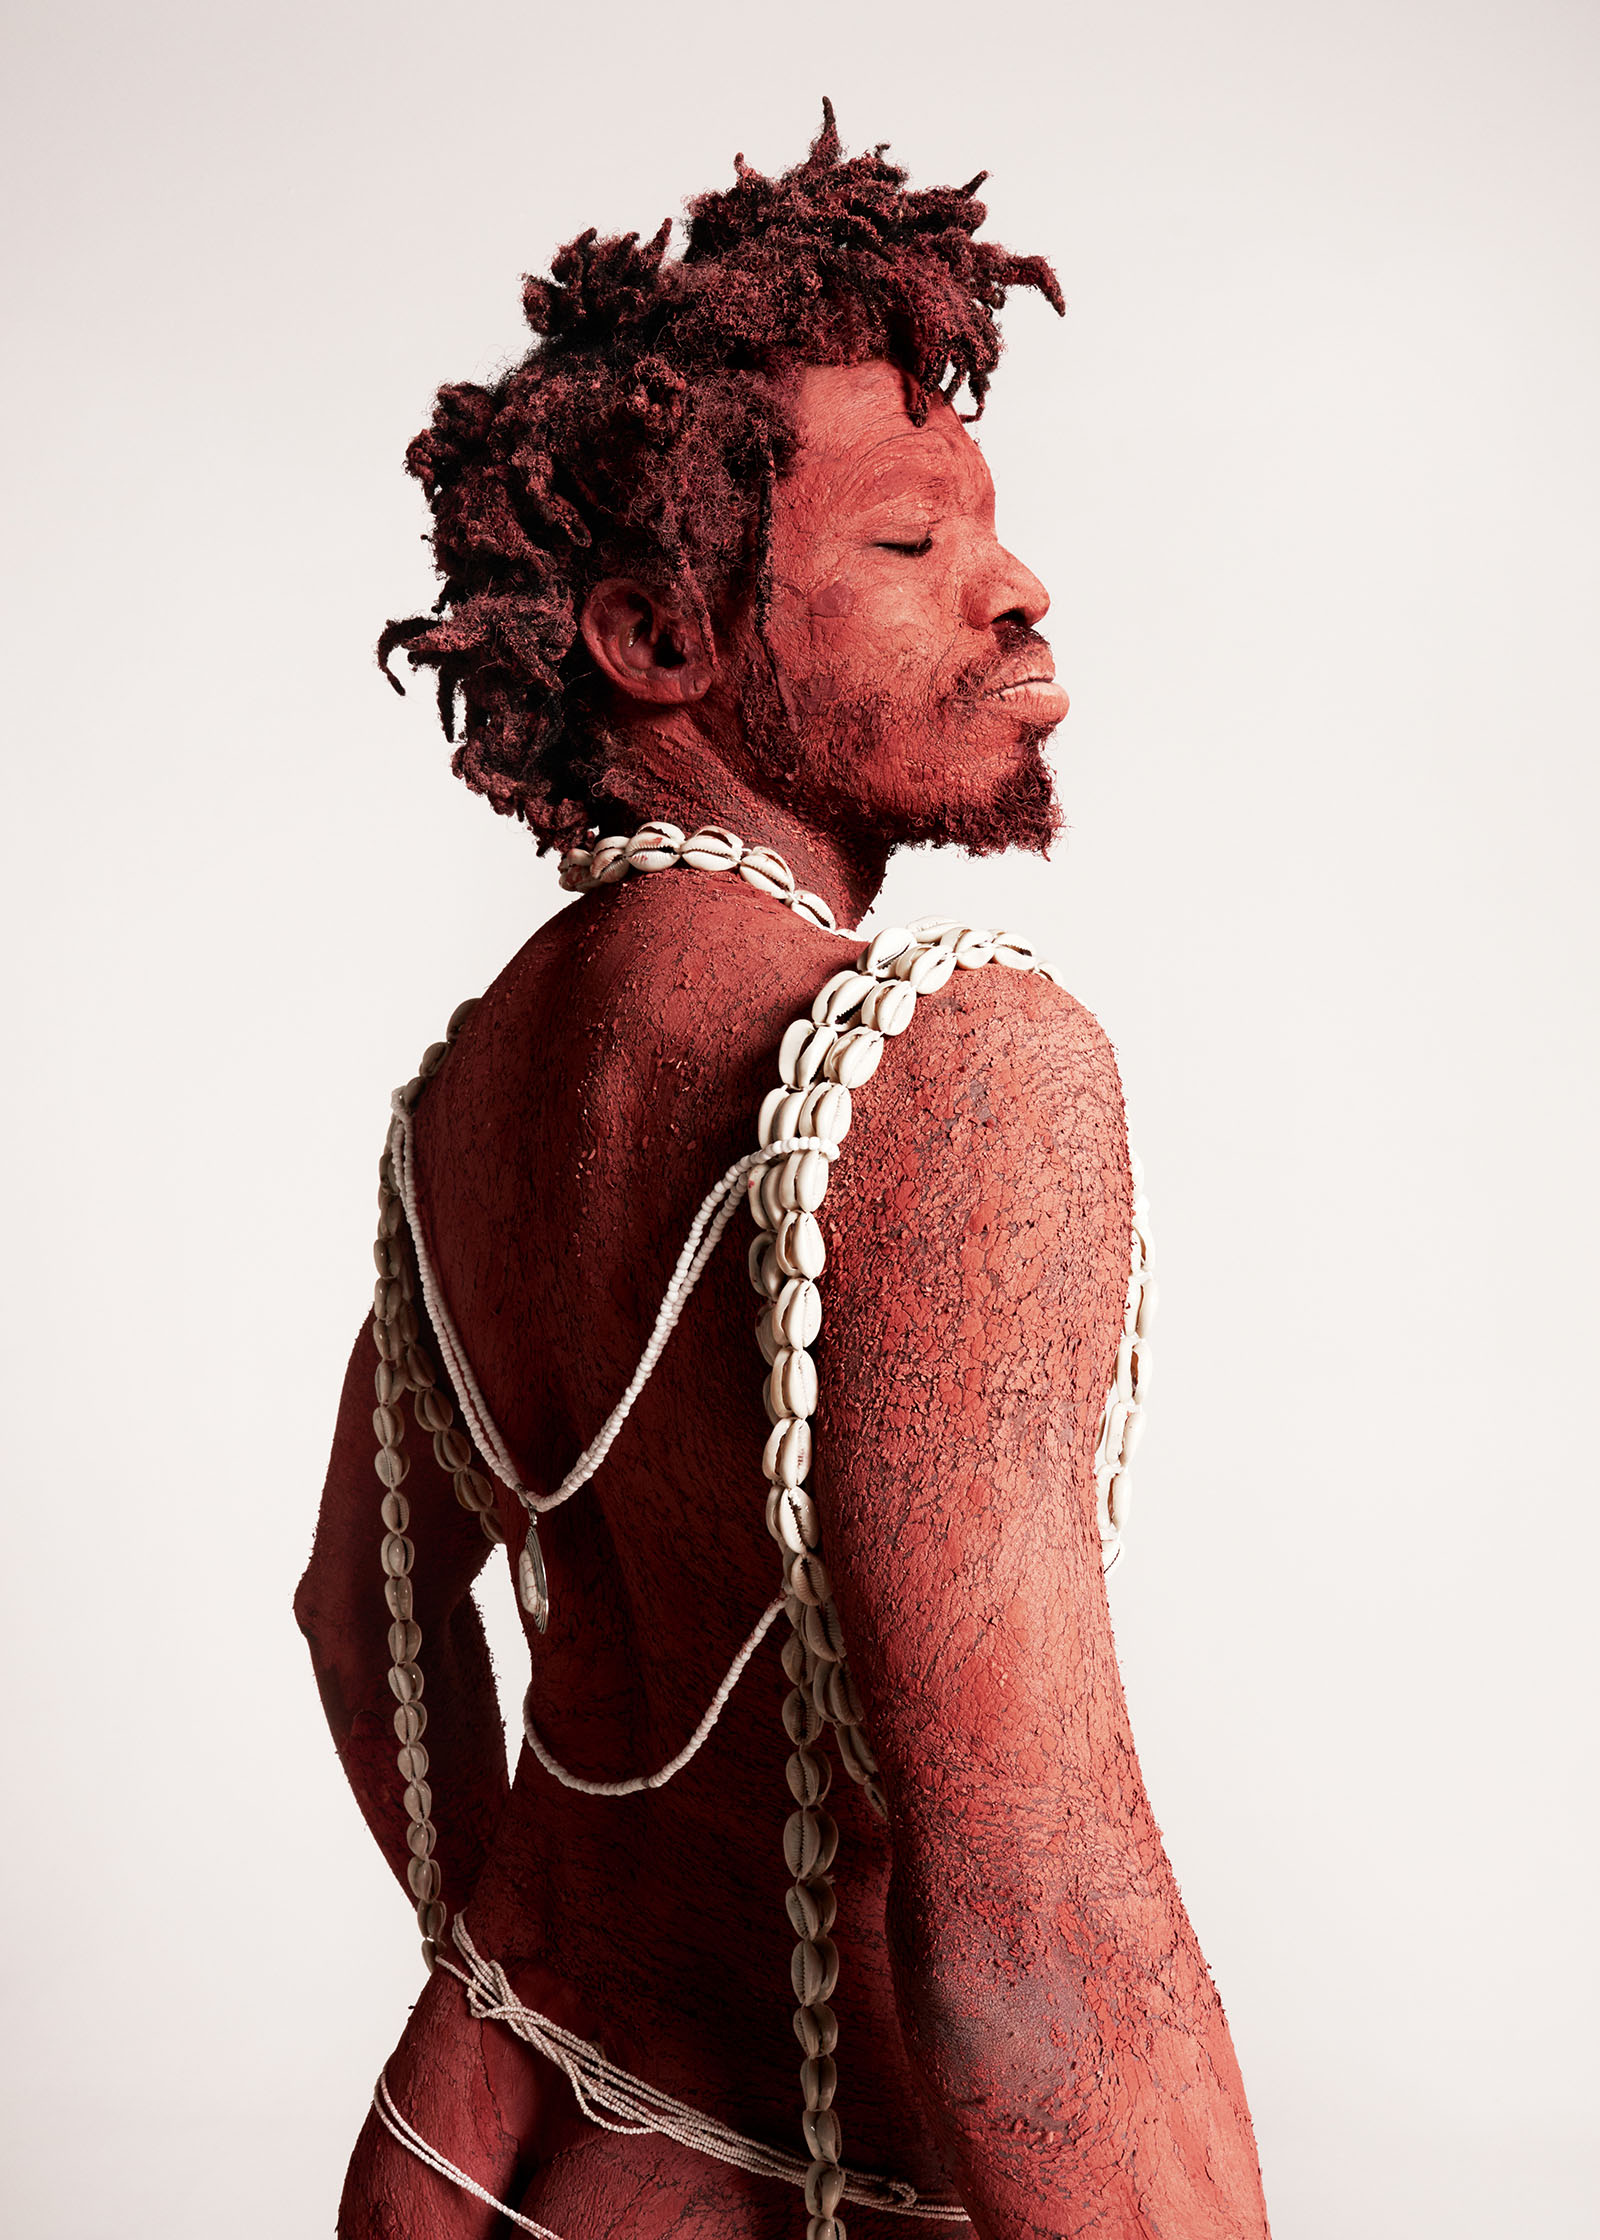 A man looks over his shoulder, covered in red pigment with shell necklaces draped over his back.